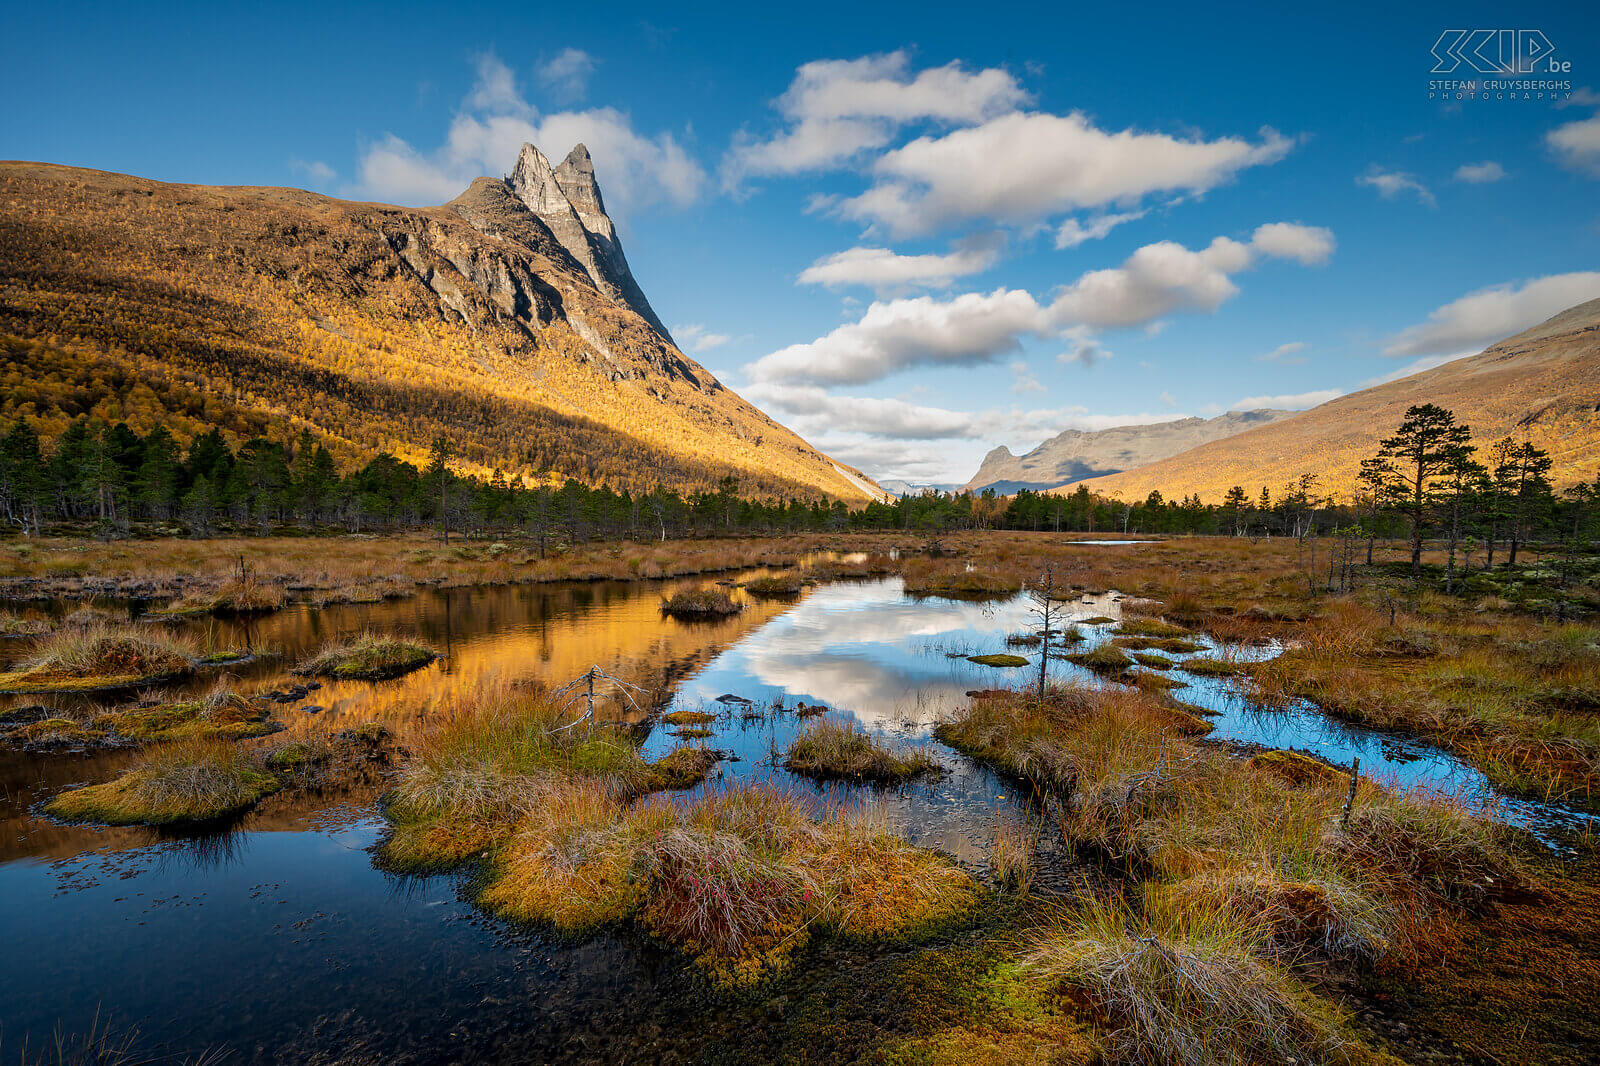 Oteren - Otertinden Beautiful sunlight and beautiful autumn colors at a moor in the valley of the Otertinden. The Otertinden in Signaldalen near Tromso is one of Norway's most iconic mountains with its two razor-sharp peaks. The highest peak is 1356m. Stefan Cruysberghs